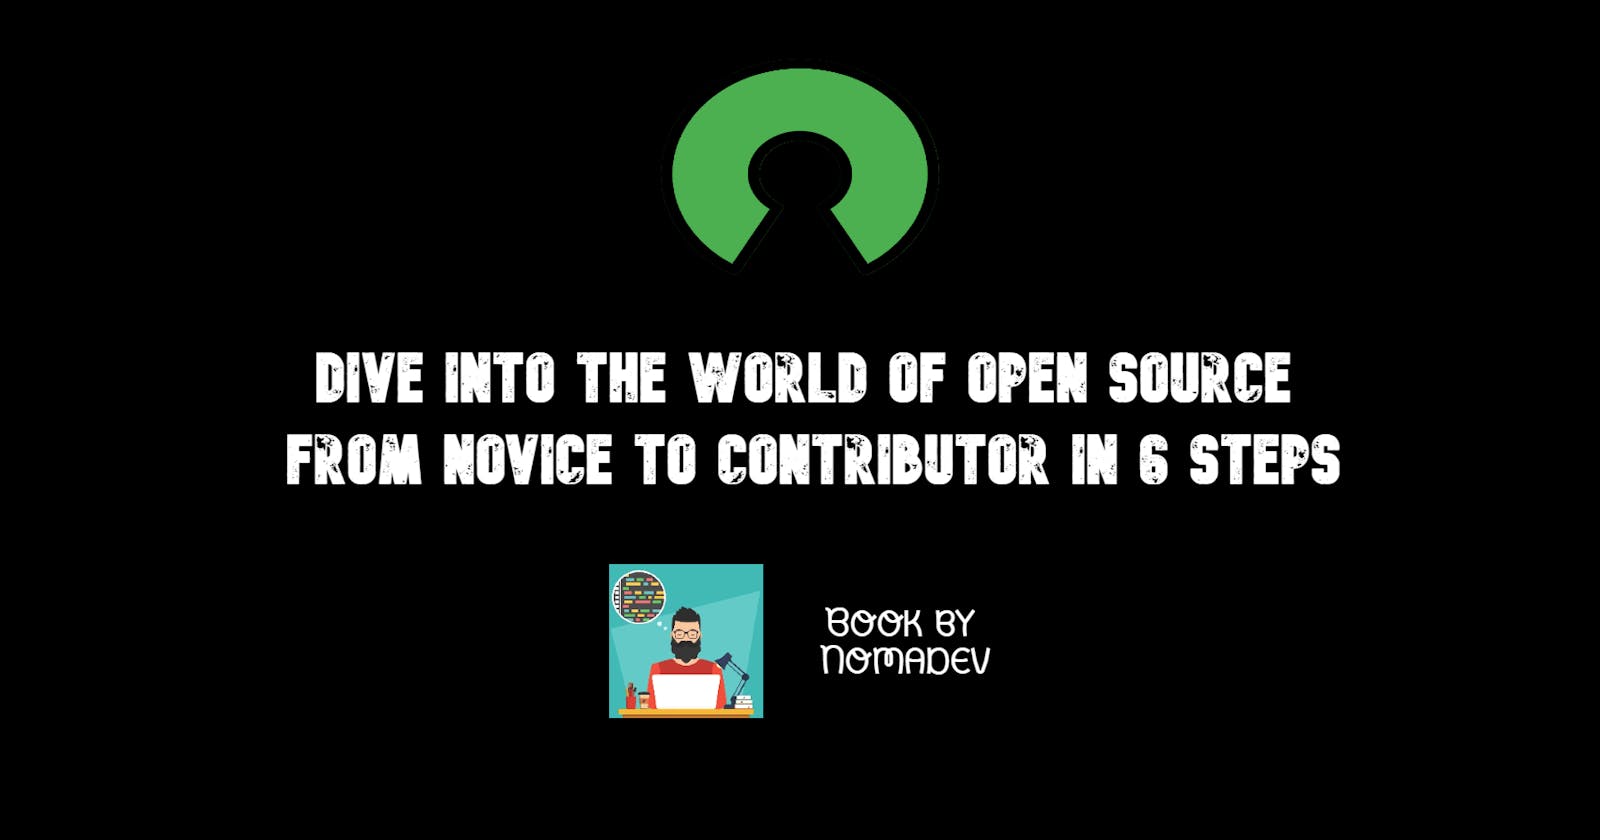 Dive Into the World of Open Source: From Novice to Contributor in 6 Steps